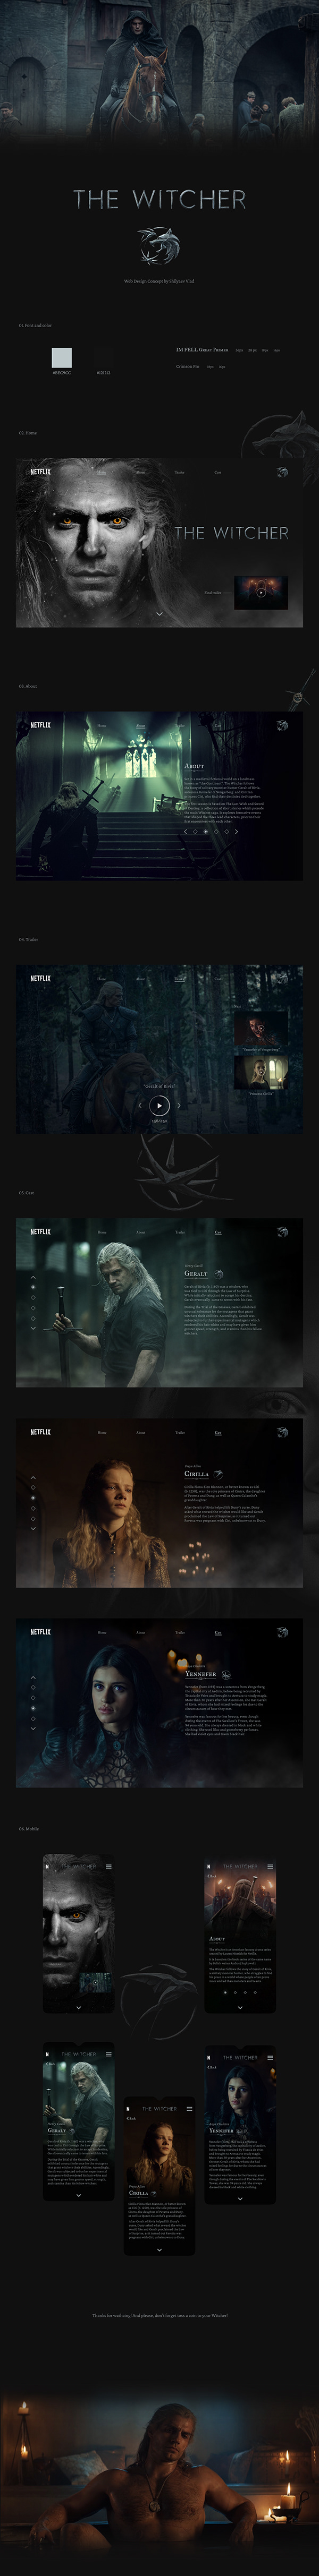 The Witcher-Design Concept